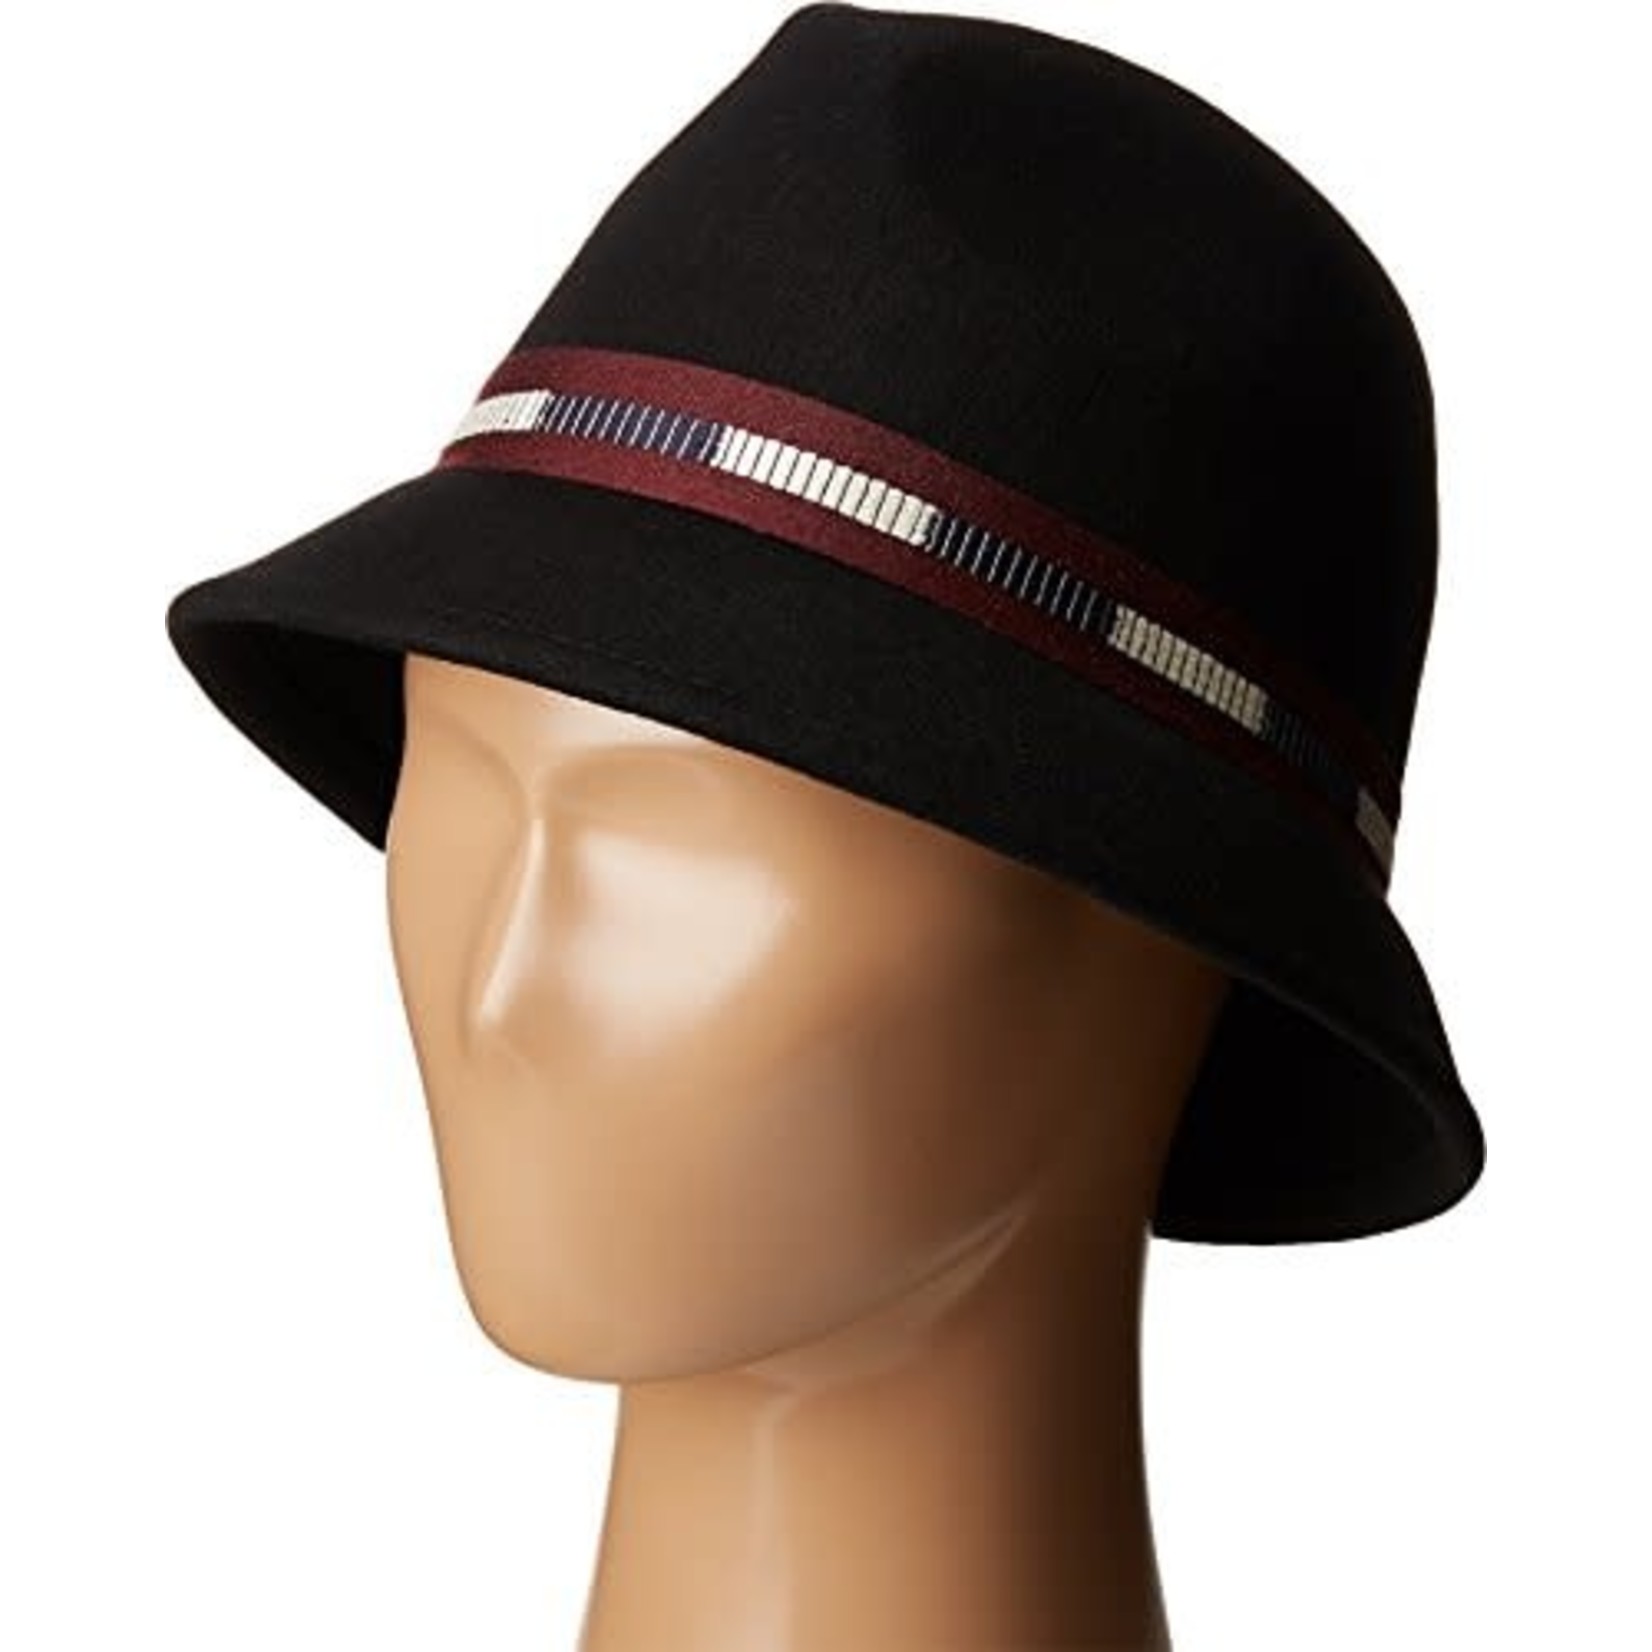 Vince Camuto Vince Camuto Women's Wool Hat